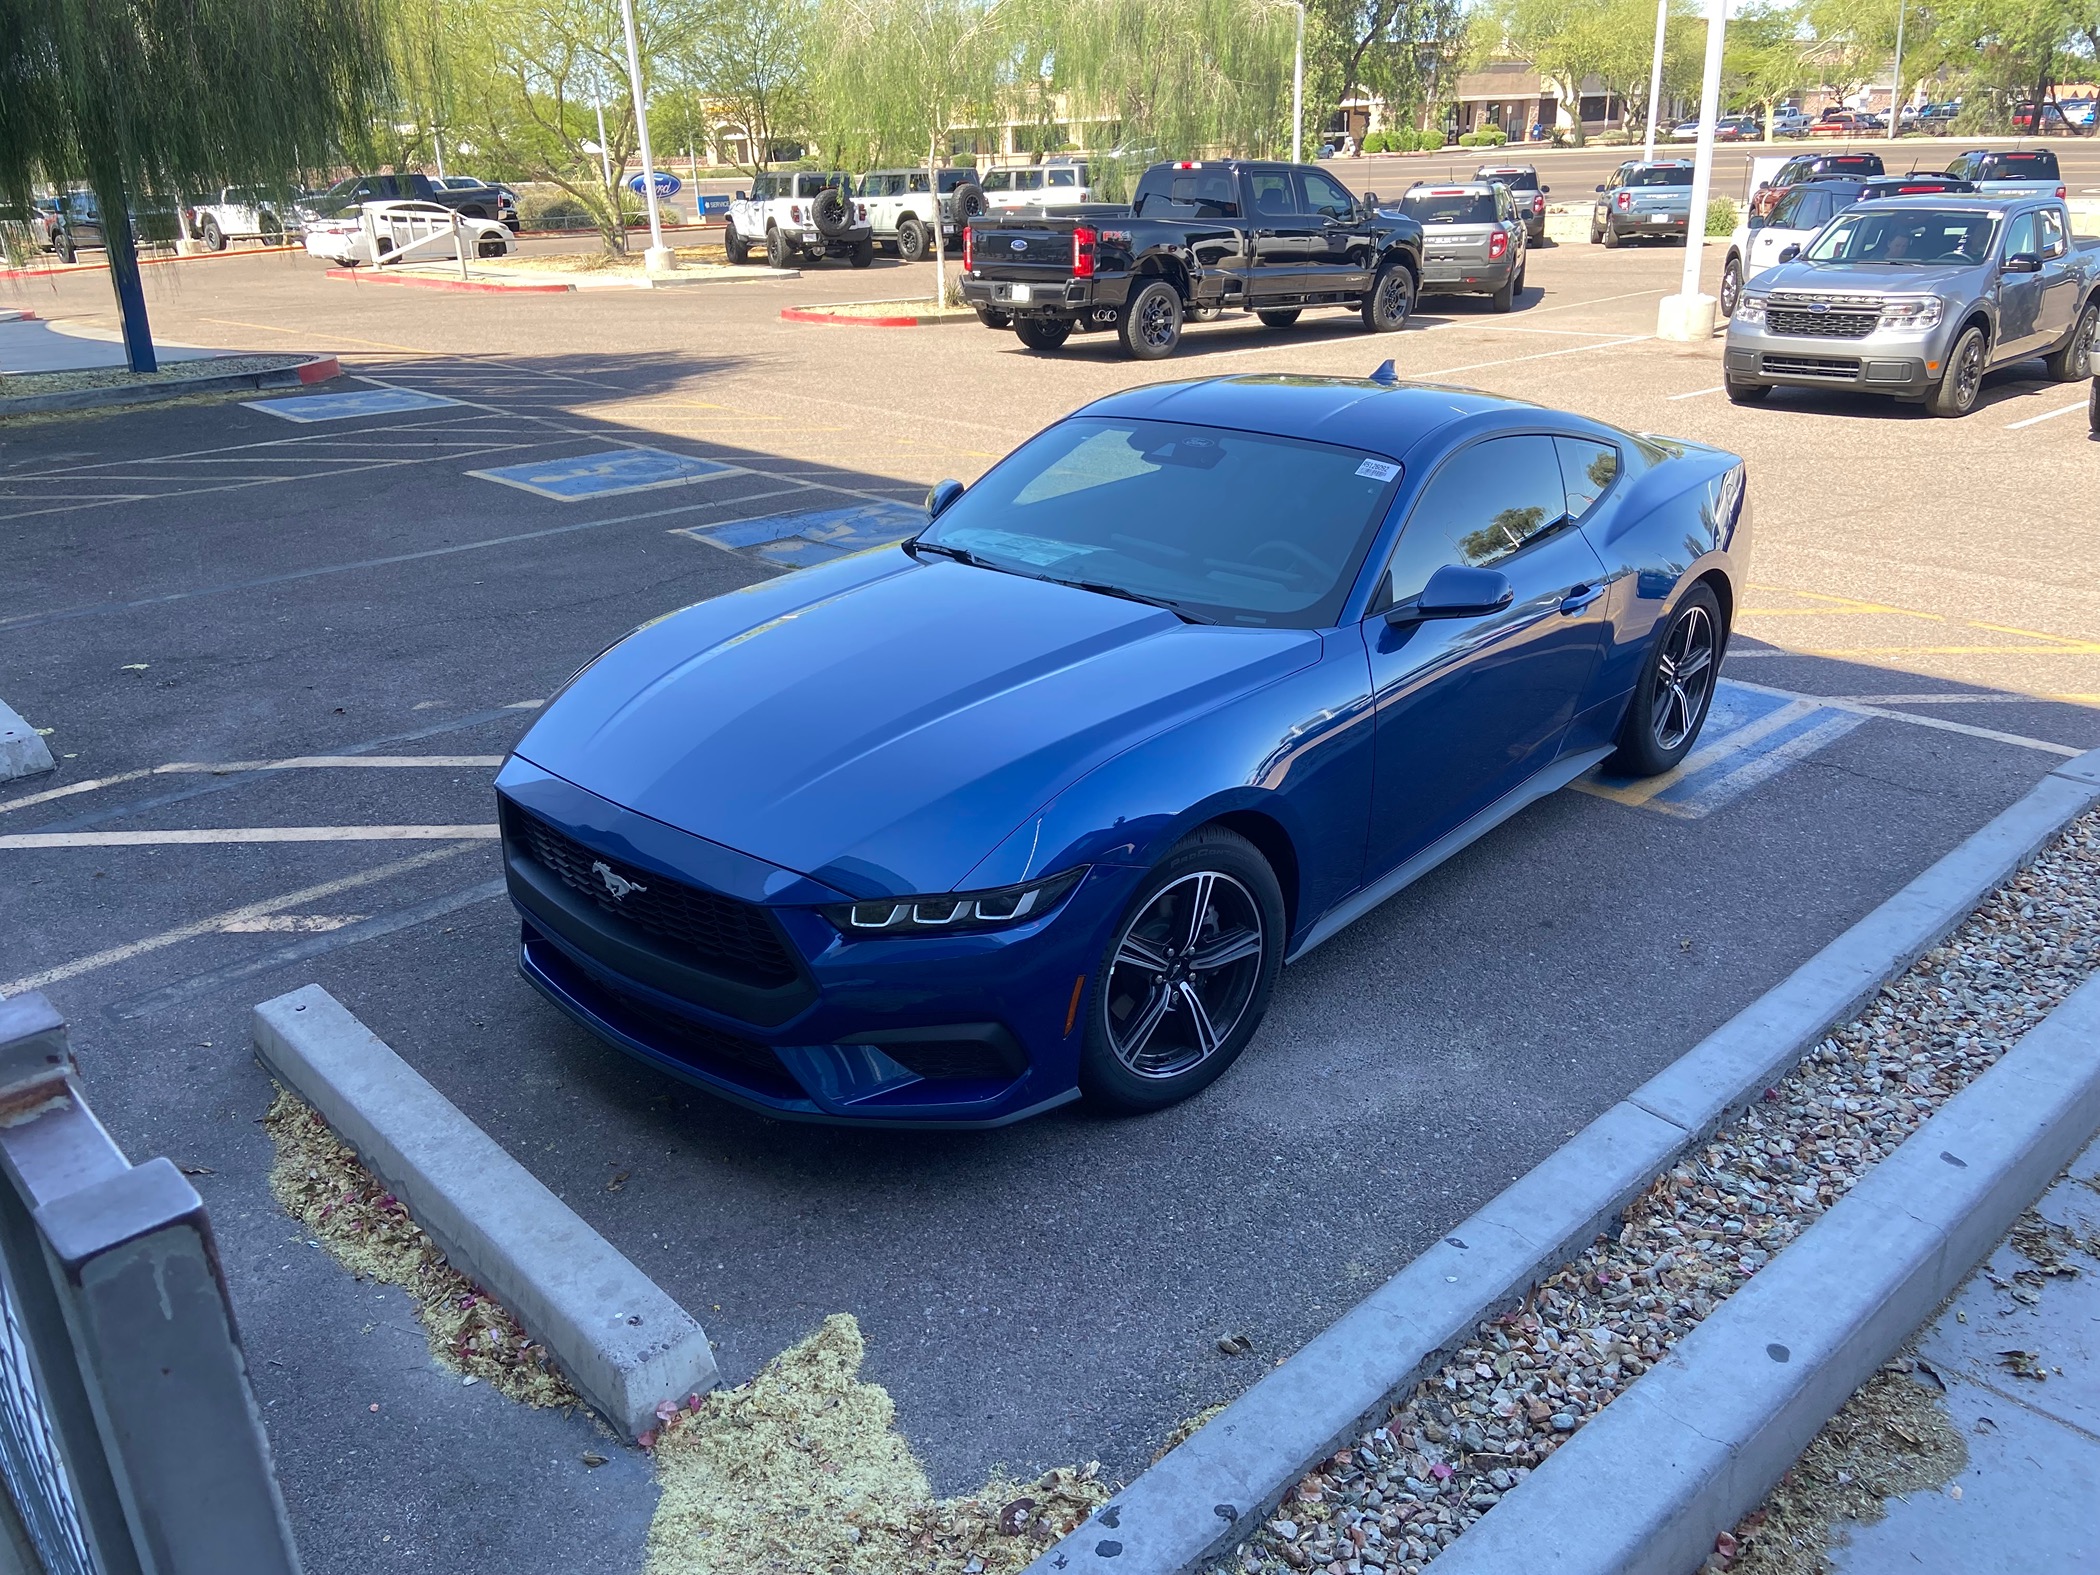 S650 Mustang Just bought a Mustang but dealer can’t release it IMG_3686